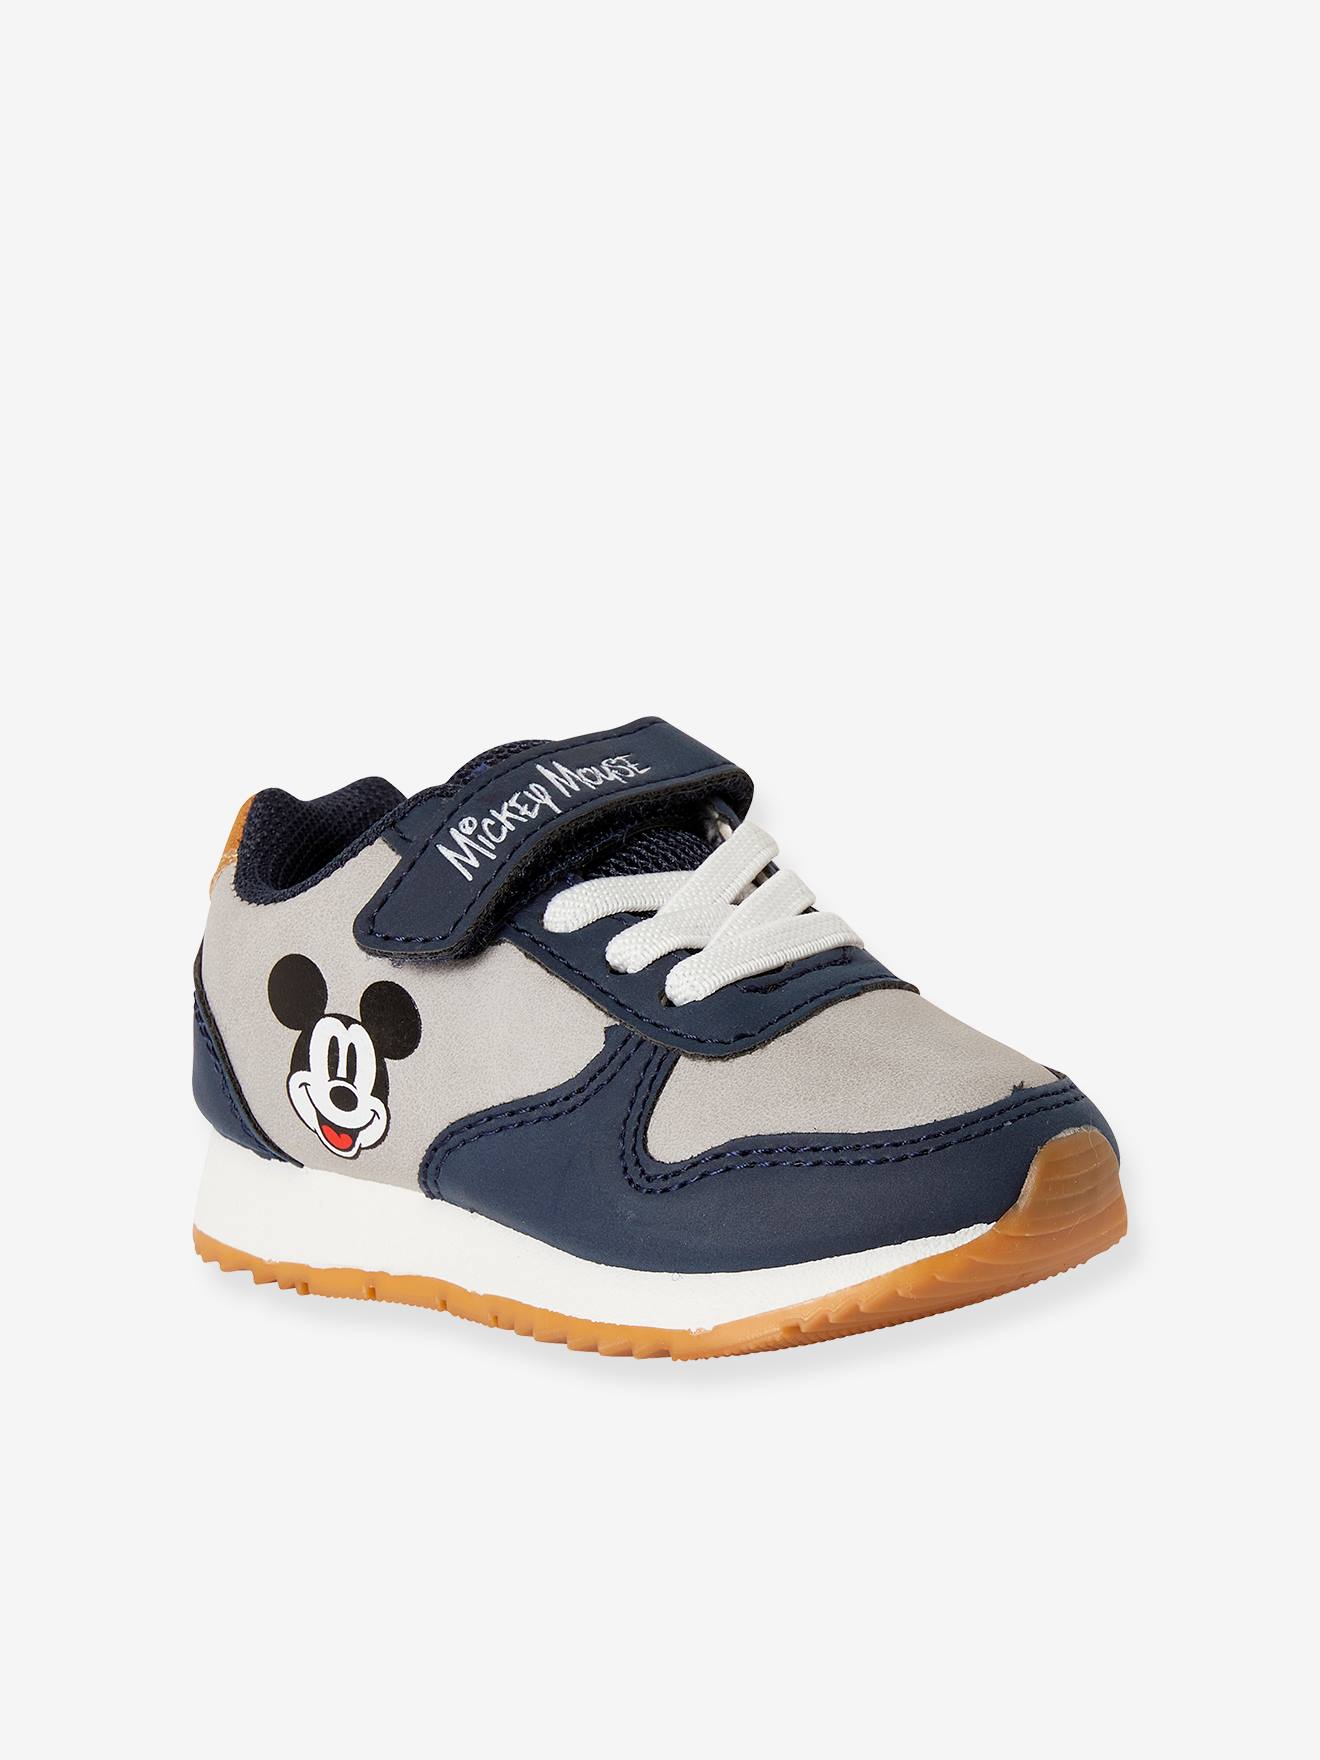 Disney Boys Mickey Mouse Canvas Pumps Toddler First Walkers Plimsolls  Trainers Blue UK 4 Child: Amazon.co.uk: Fashion